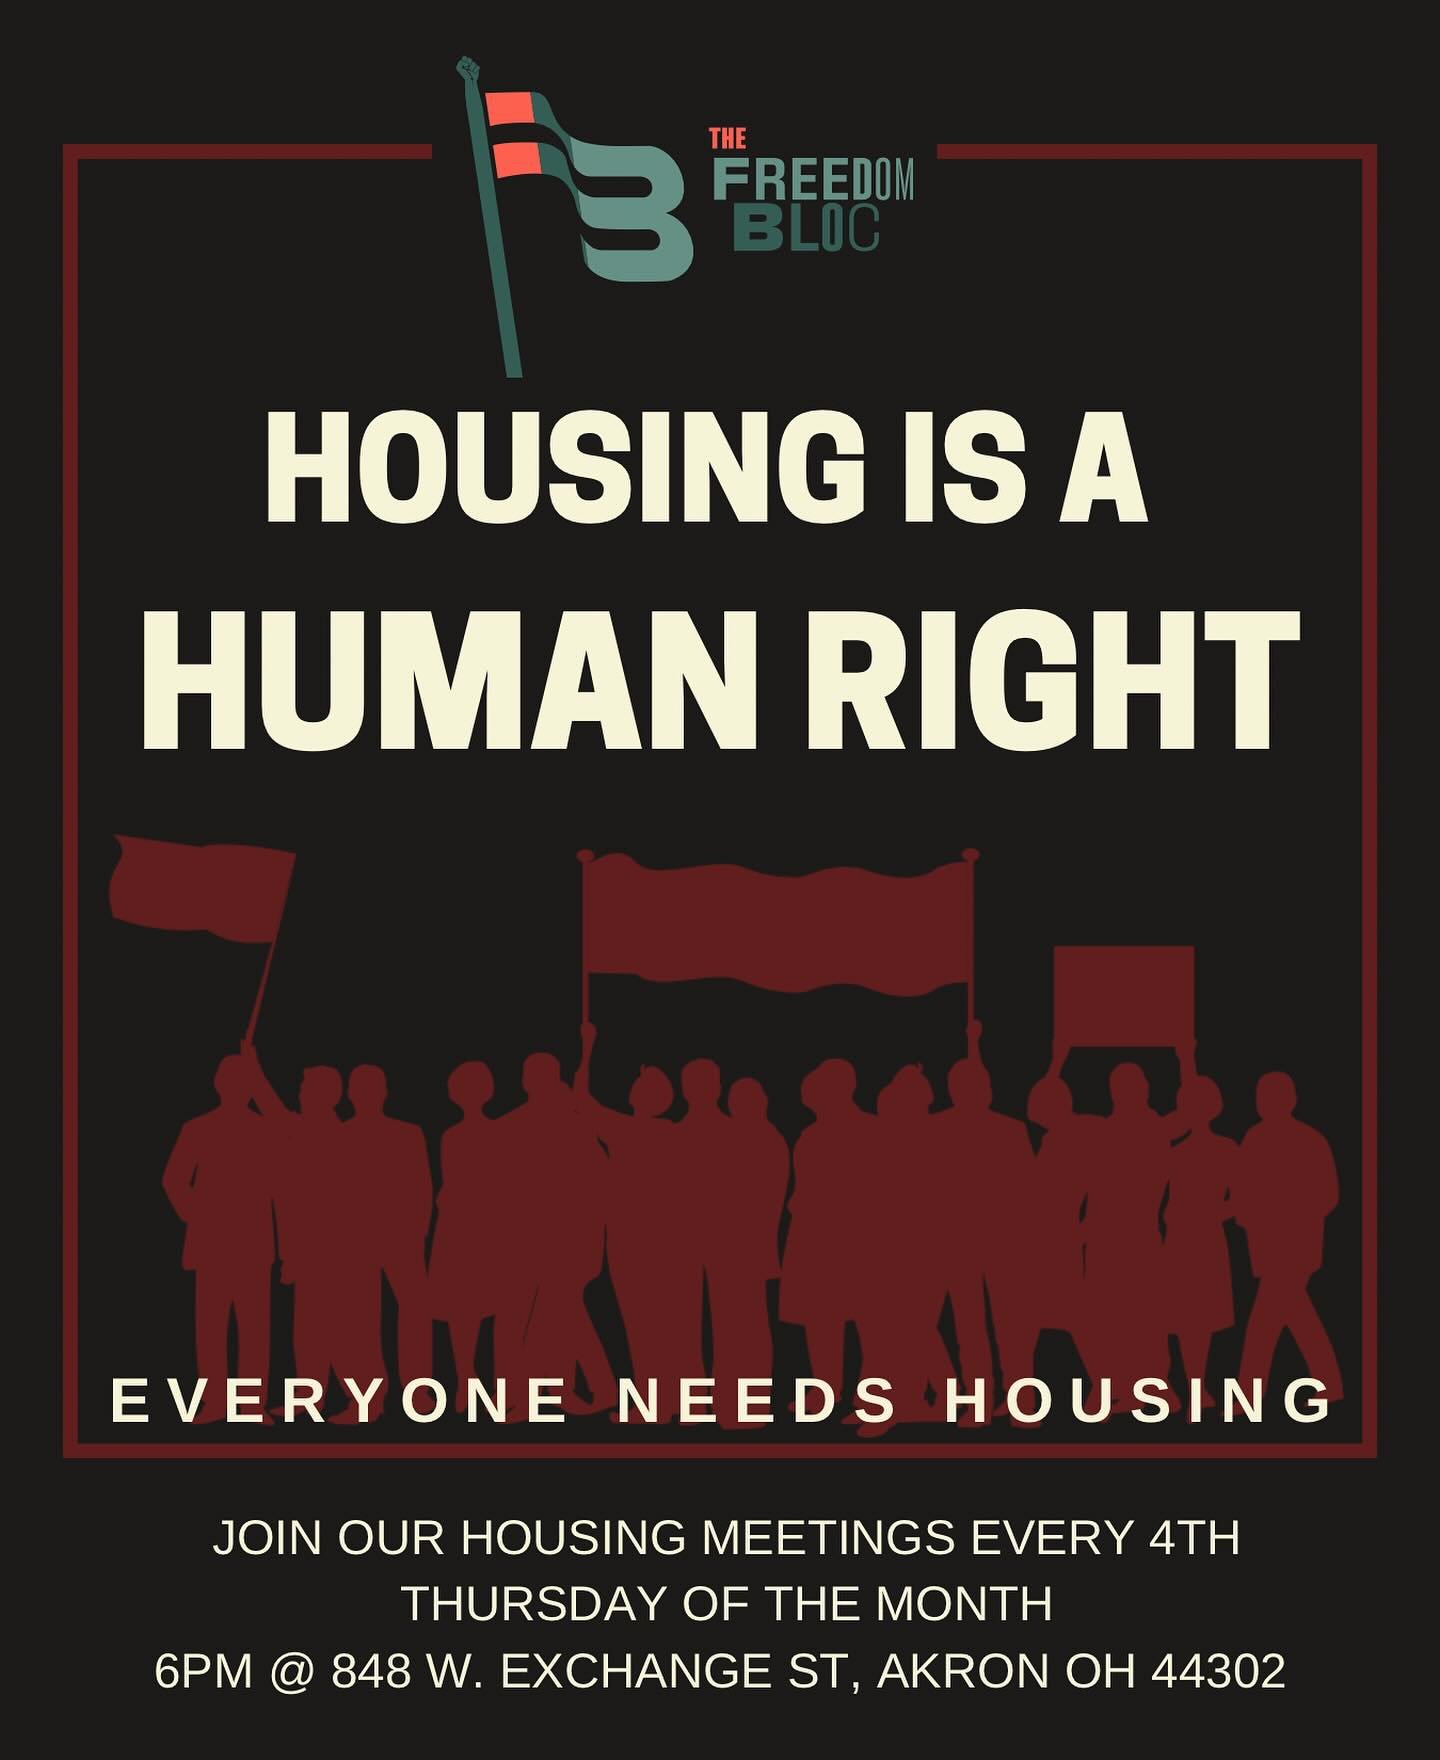 Our next Housing Meeting is right around the corner! We will be meeting at the Freedom Bloc next Thursday April 25th at 6pm, see you there! Let&rsquo;s change the Narrative, Housing is a Human Right!